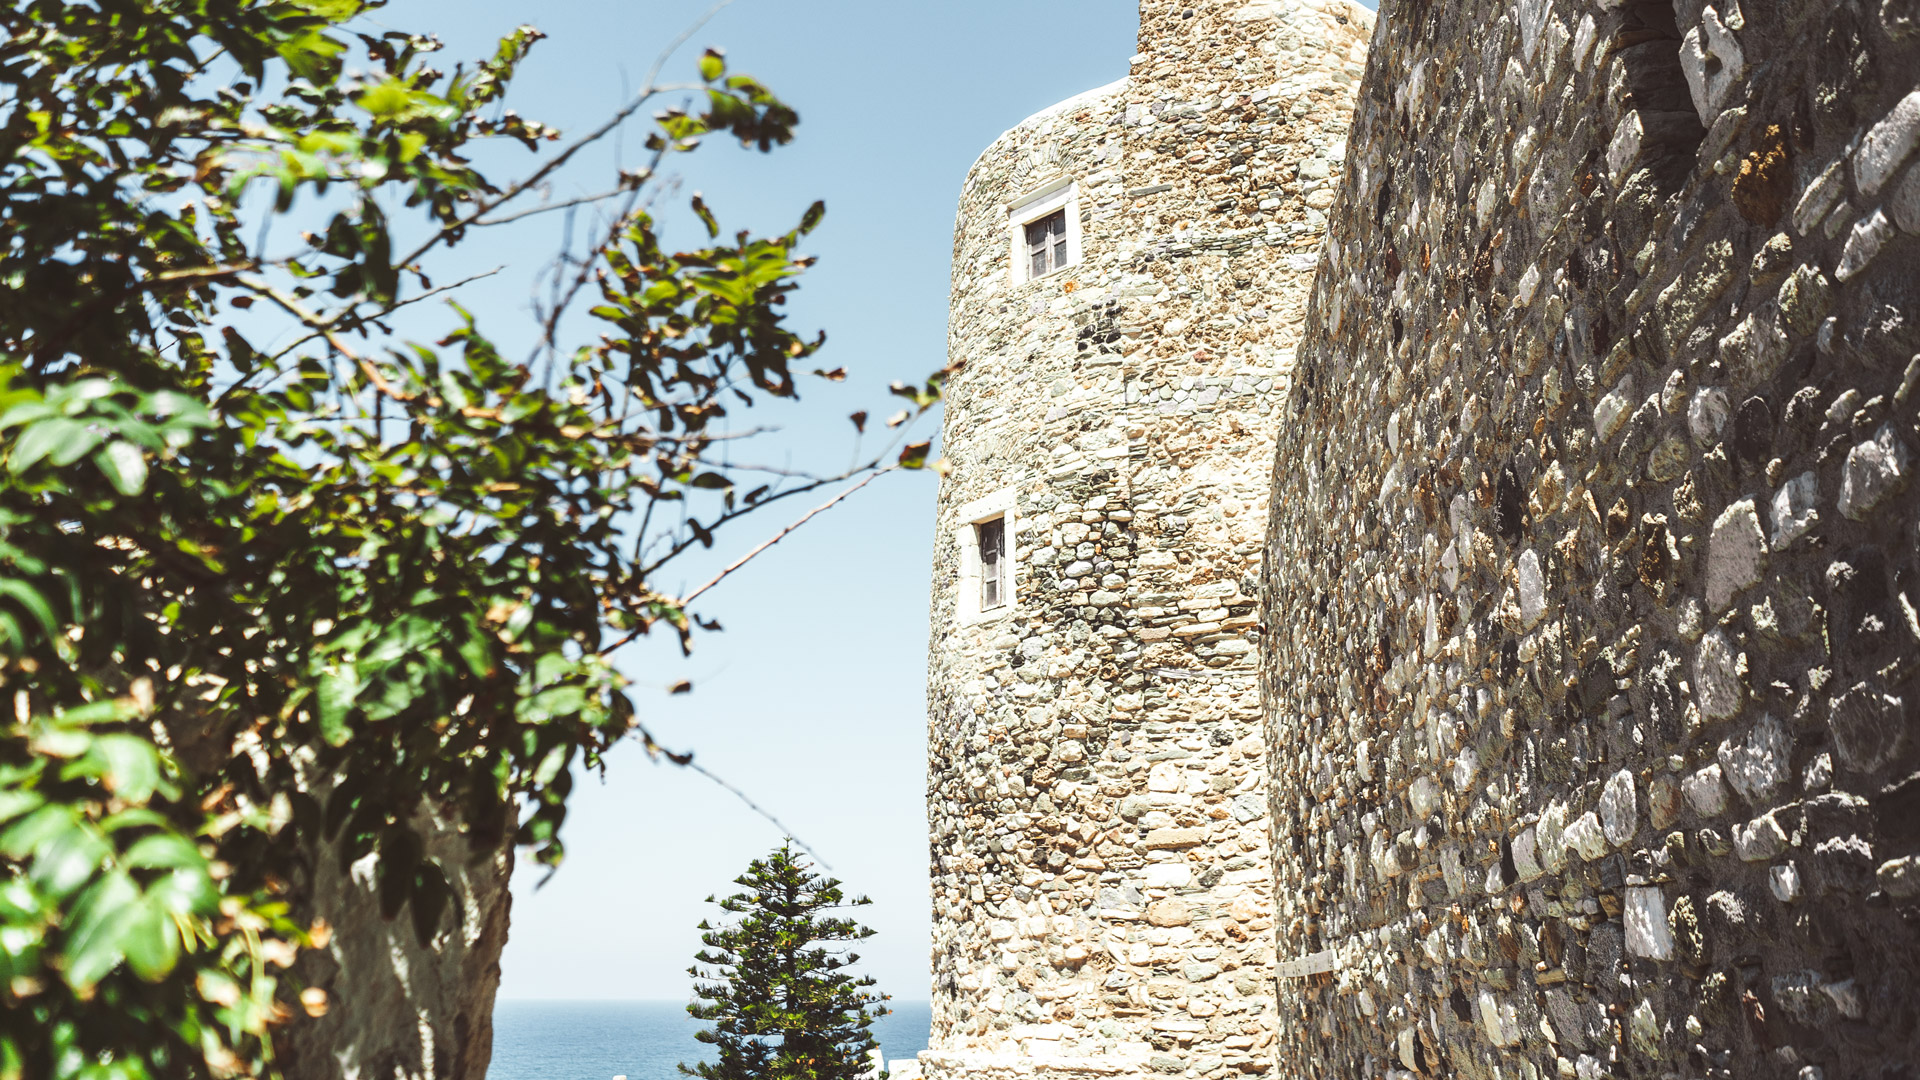 Walking through the castle's Trani Gate, you're transported to another time and mood